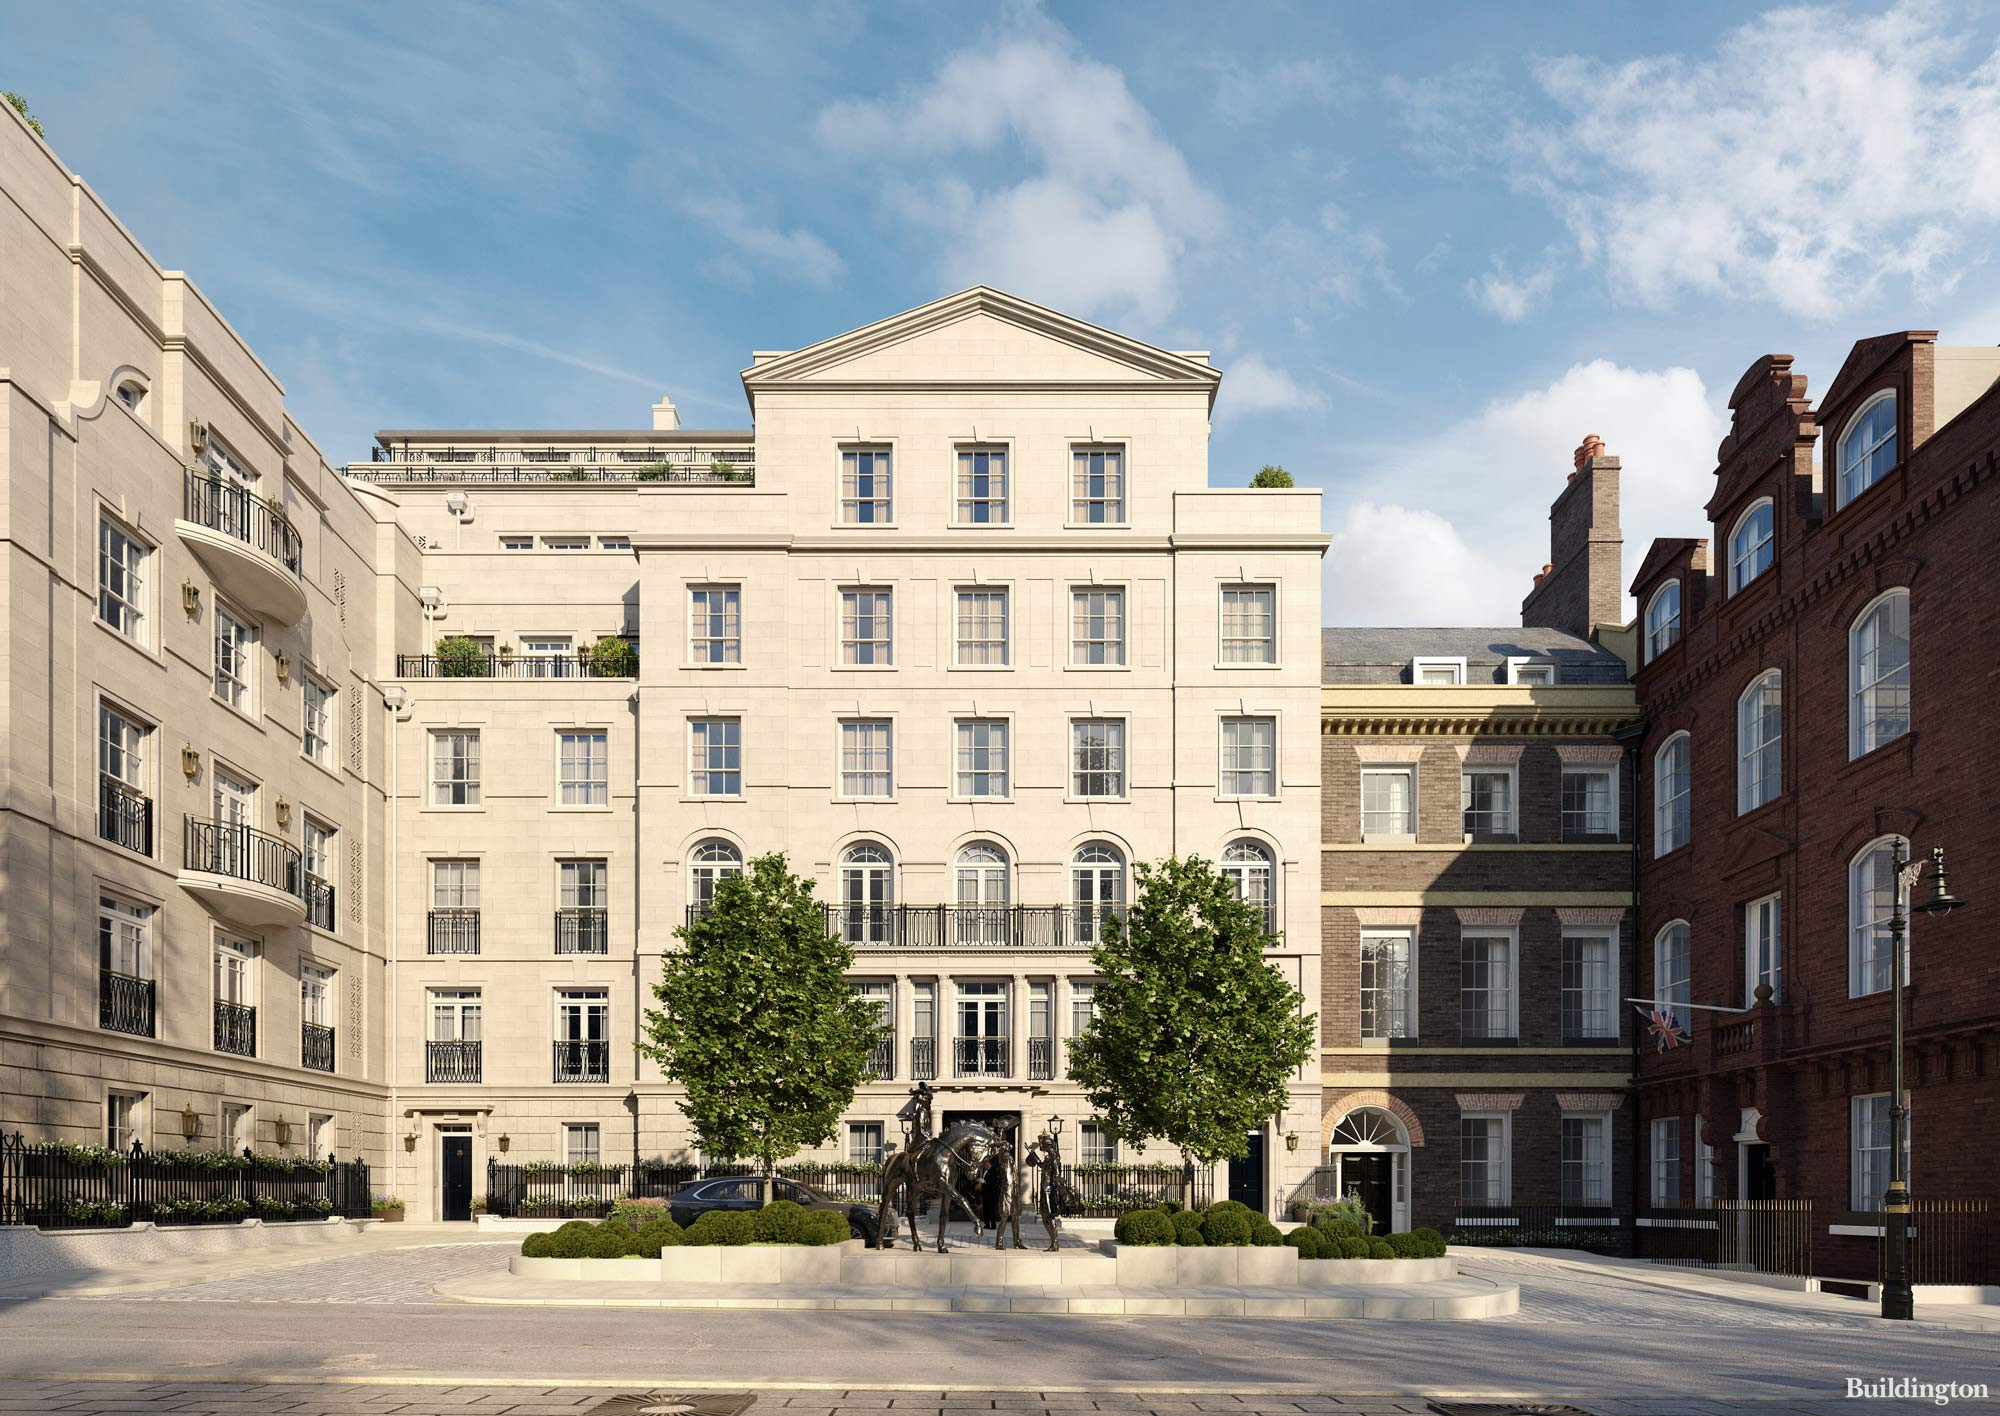 CGI of 1 Mayfair residential development by Caudwell designed by RAMSA in Mayfair, London  W1K